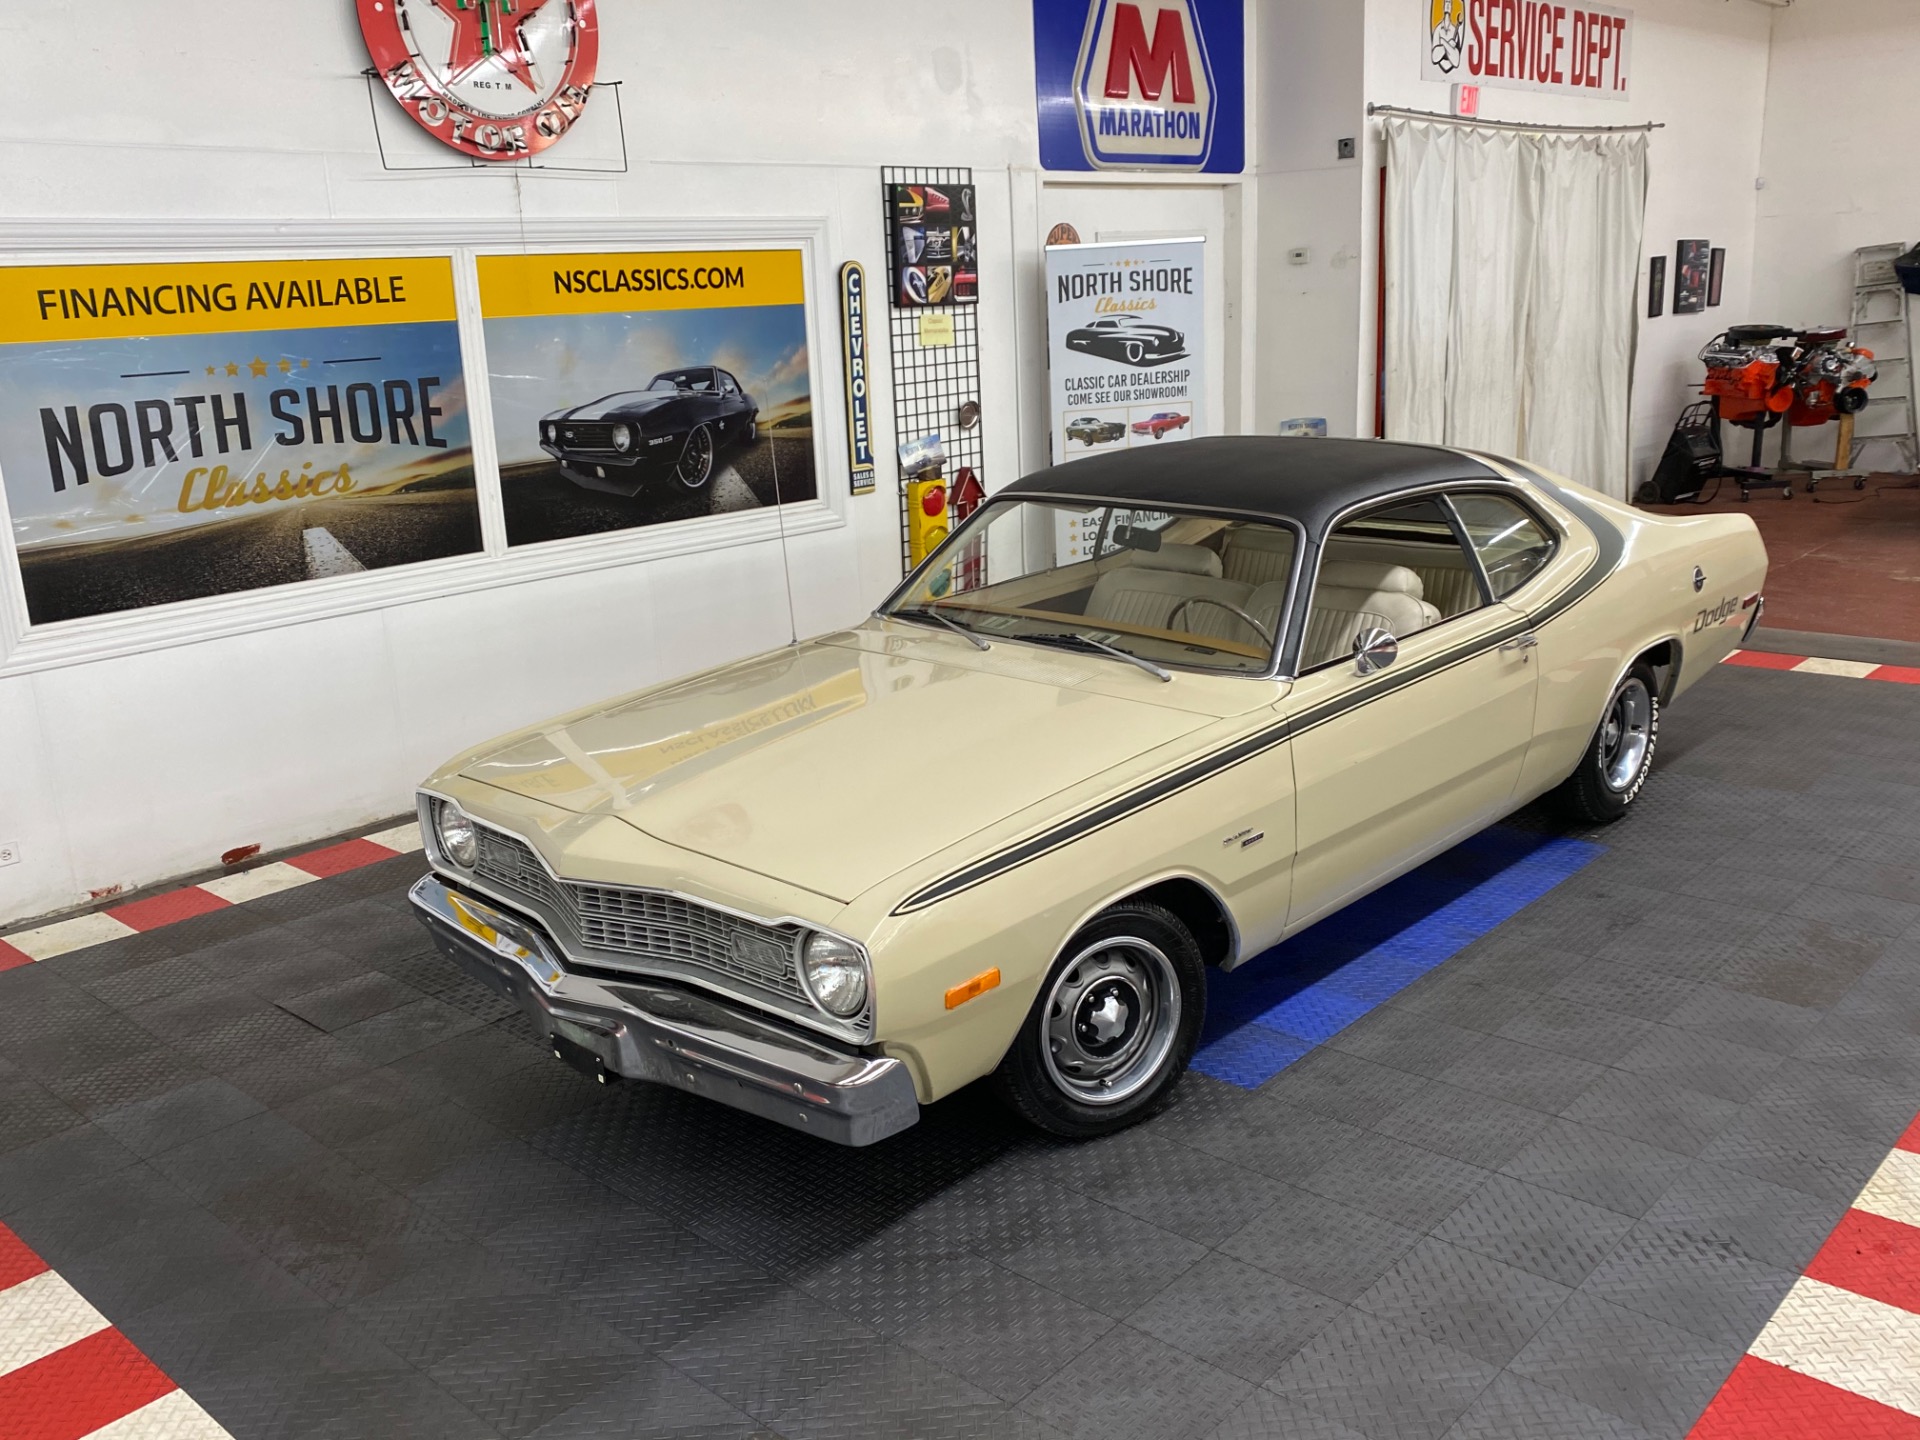 Used 1973 Dodge Dart CLEAN ORIGINAL CONDITION - 318 V8 ENGINE - SEE VIDEO - For Sale (Sold) | North Shore Classics Stock #73828NSC